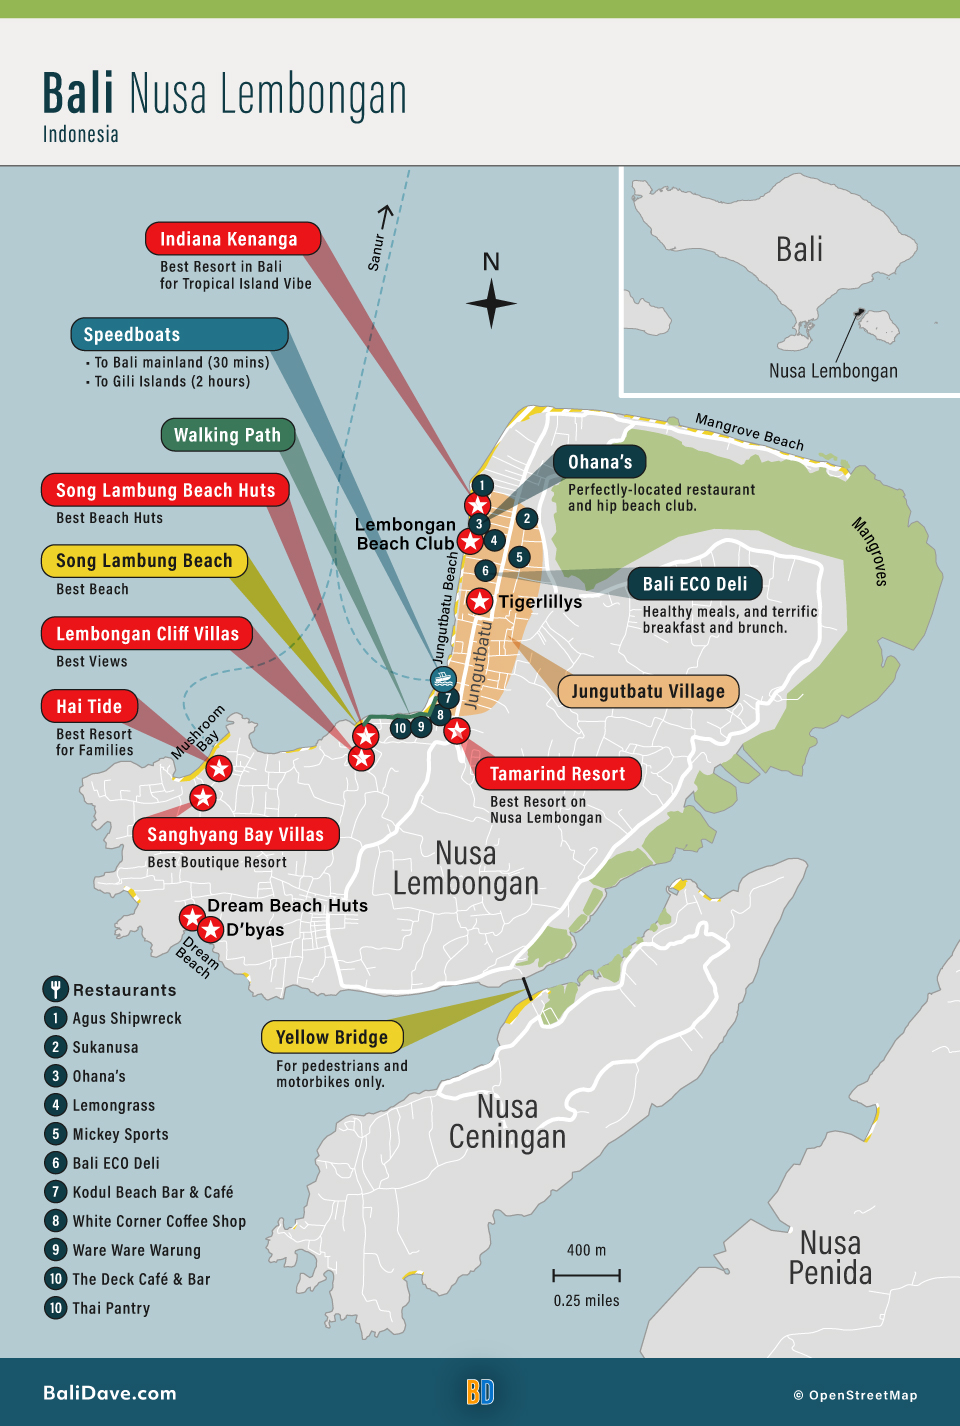 Map of the best hotels, restaurants, and things to do on Nusa Lembongan Bali.